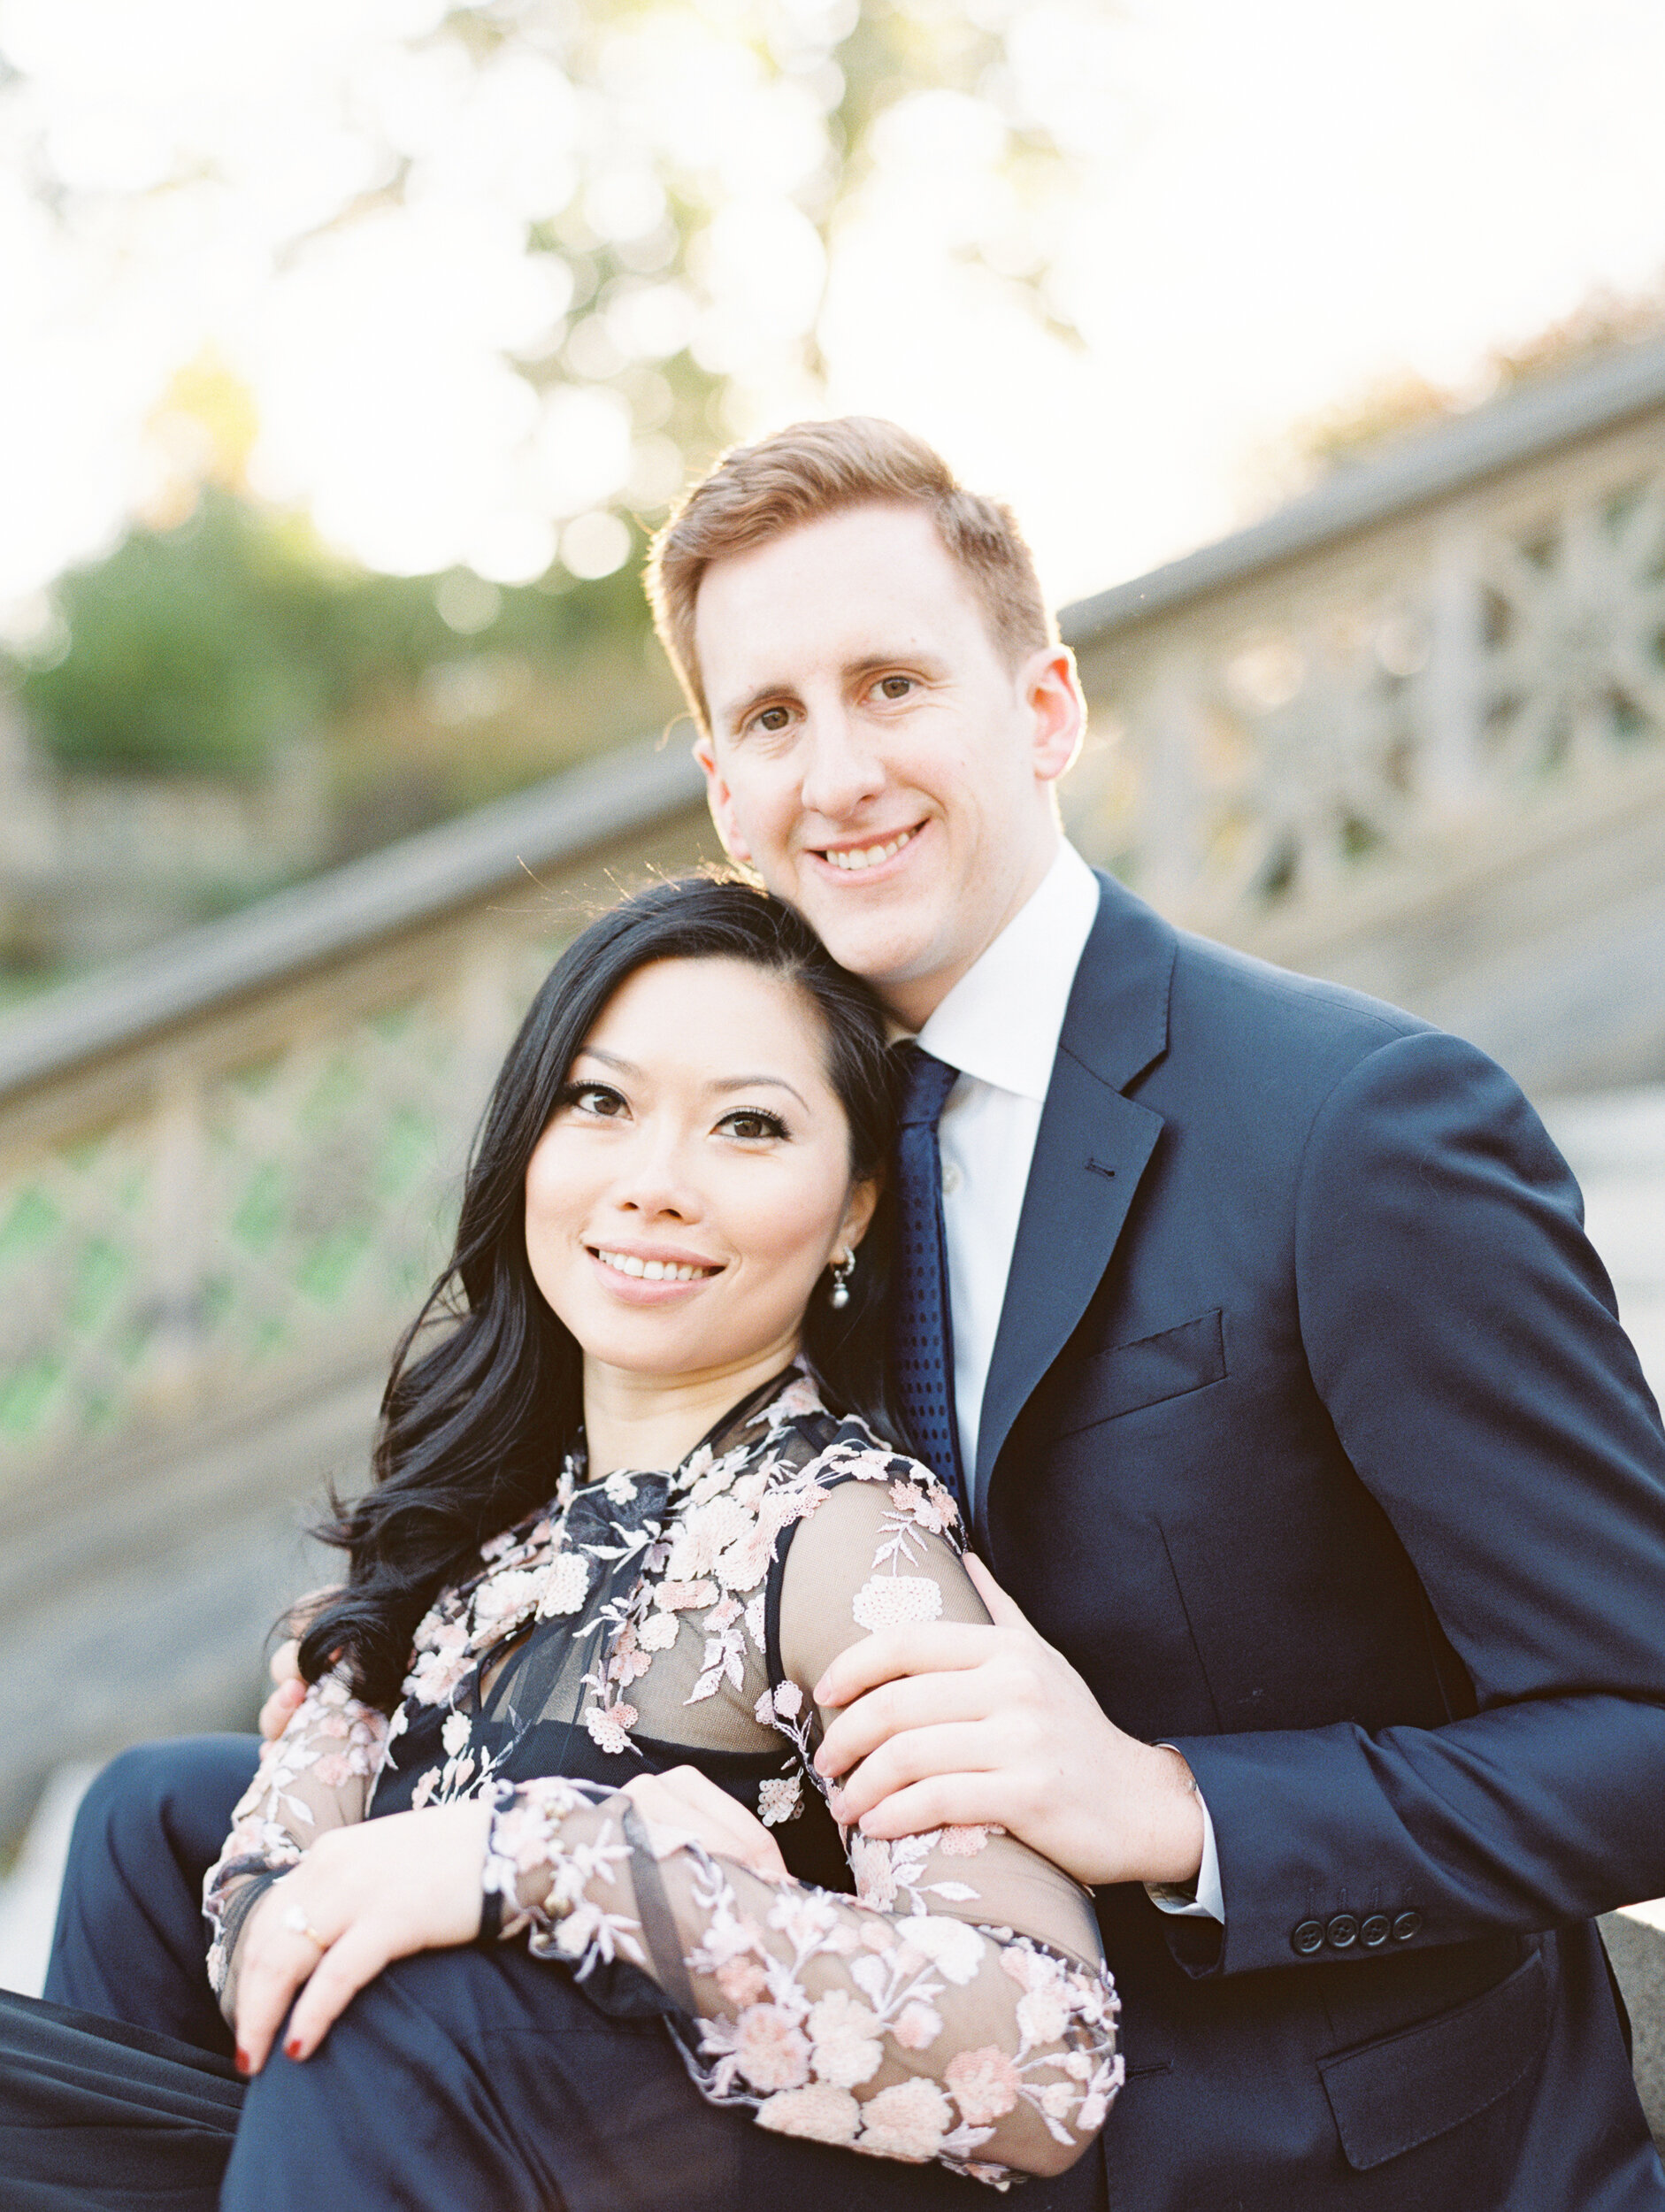 A Royal Inspired Engagement Session Photos